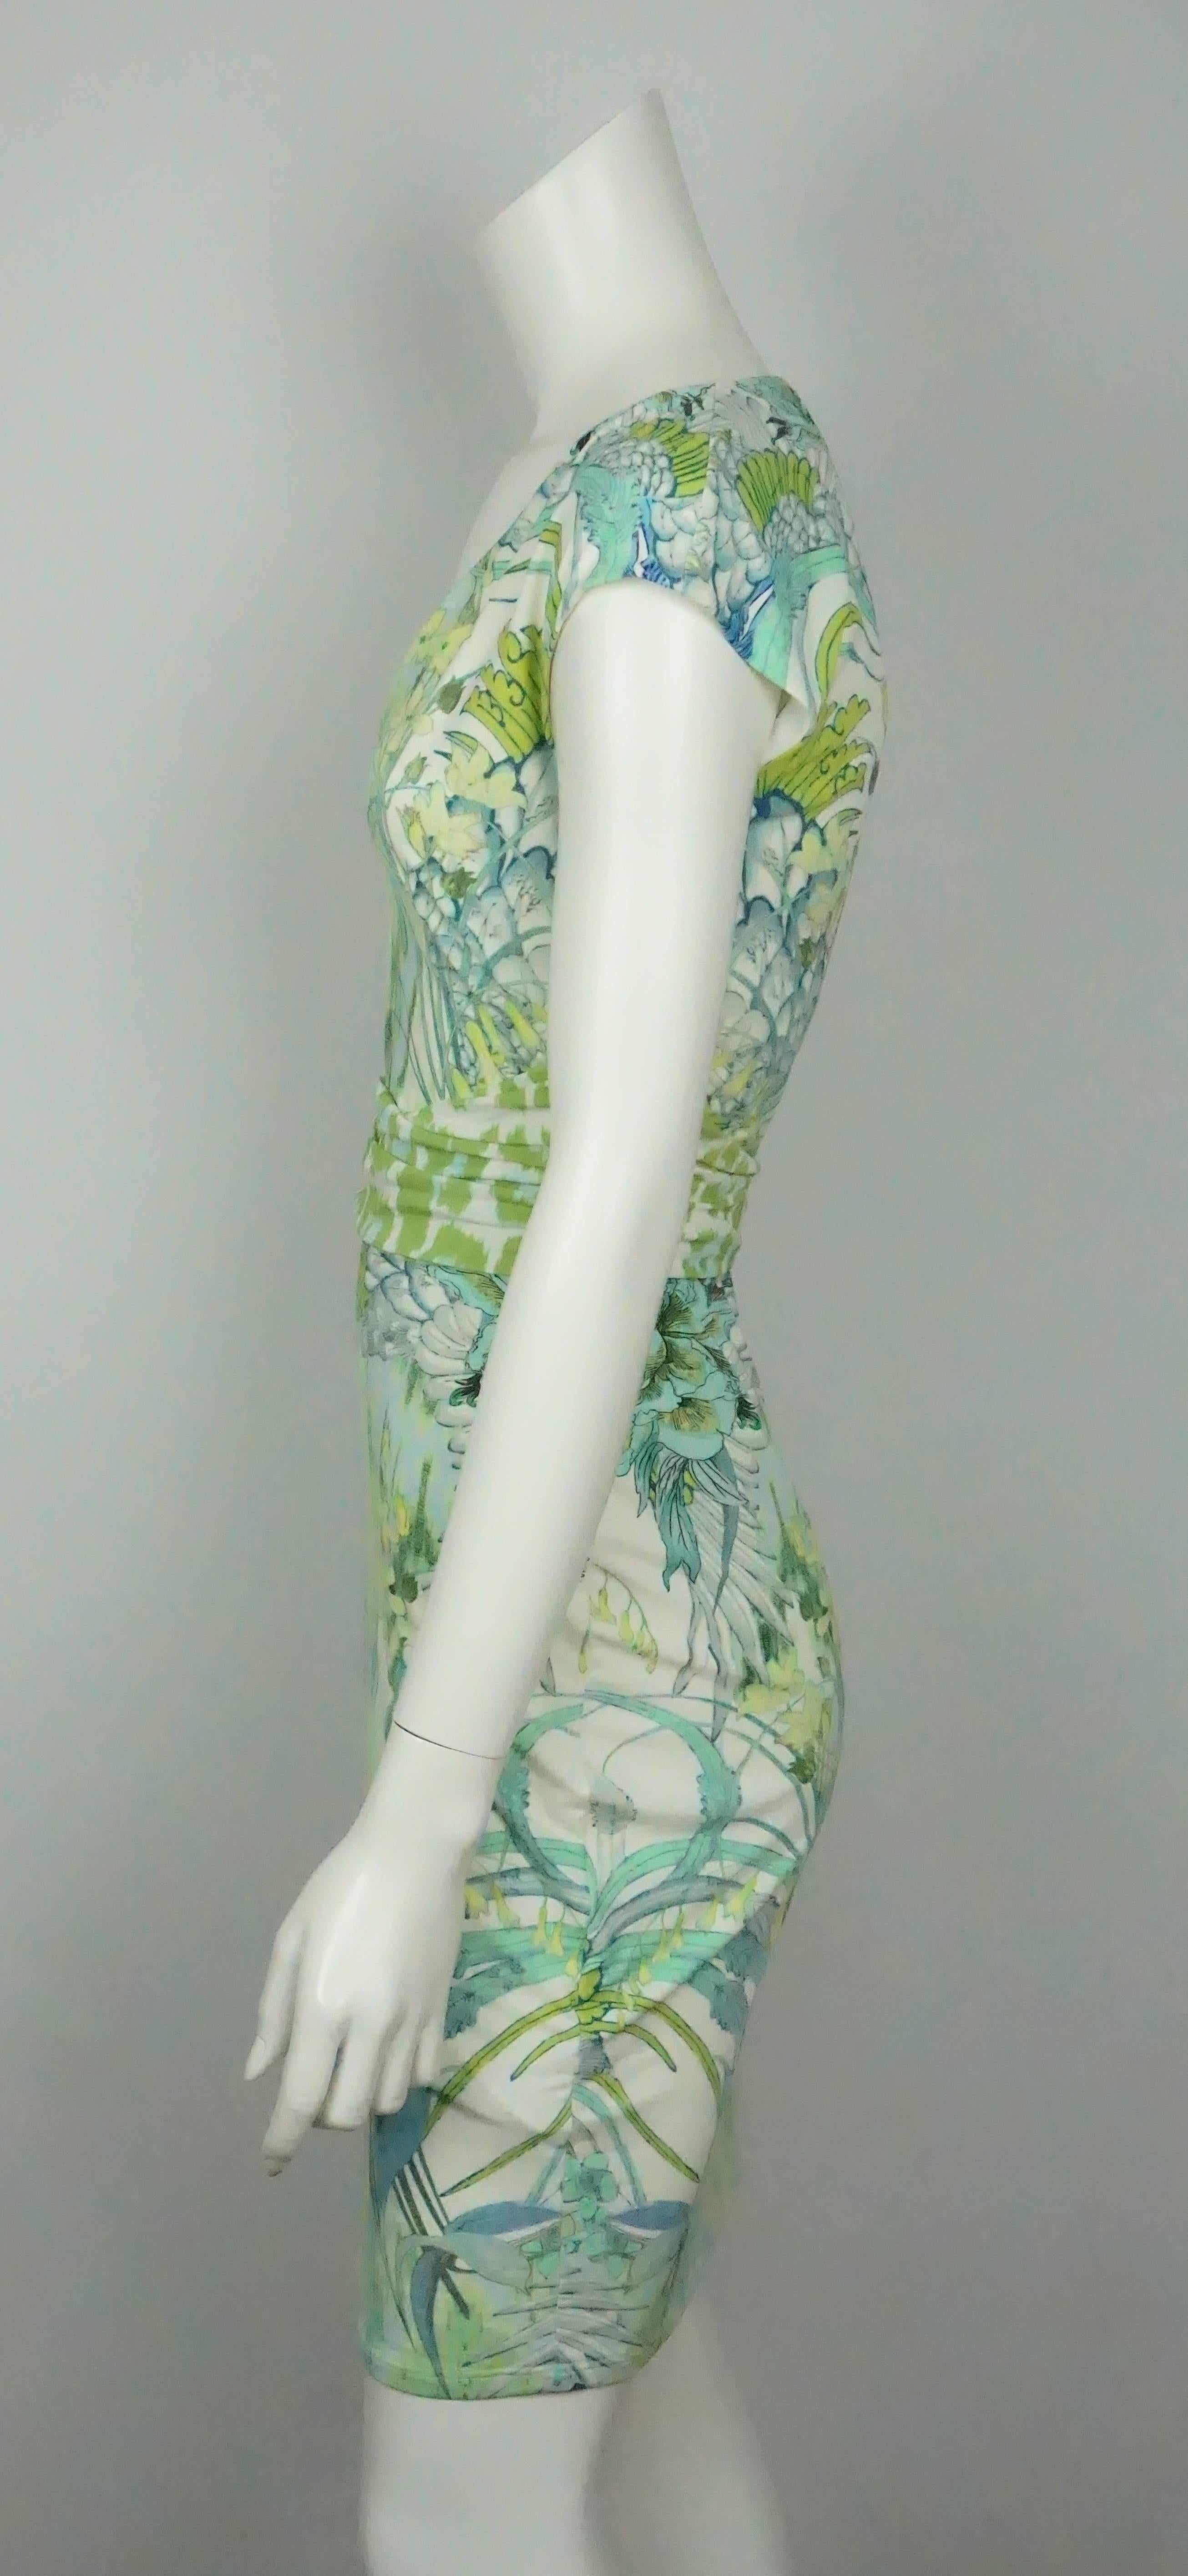 Roberto Cavalli White and Green Print Jersey Short Sleeve Dress - 40  This great summertime dress is lined to under the bust area and has a V neckline. The dress has cap sleeves and a 4.75